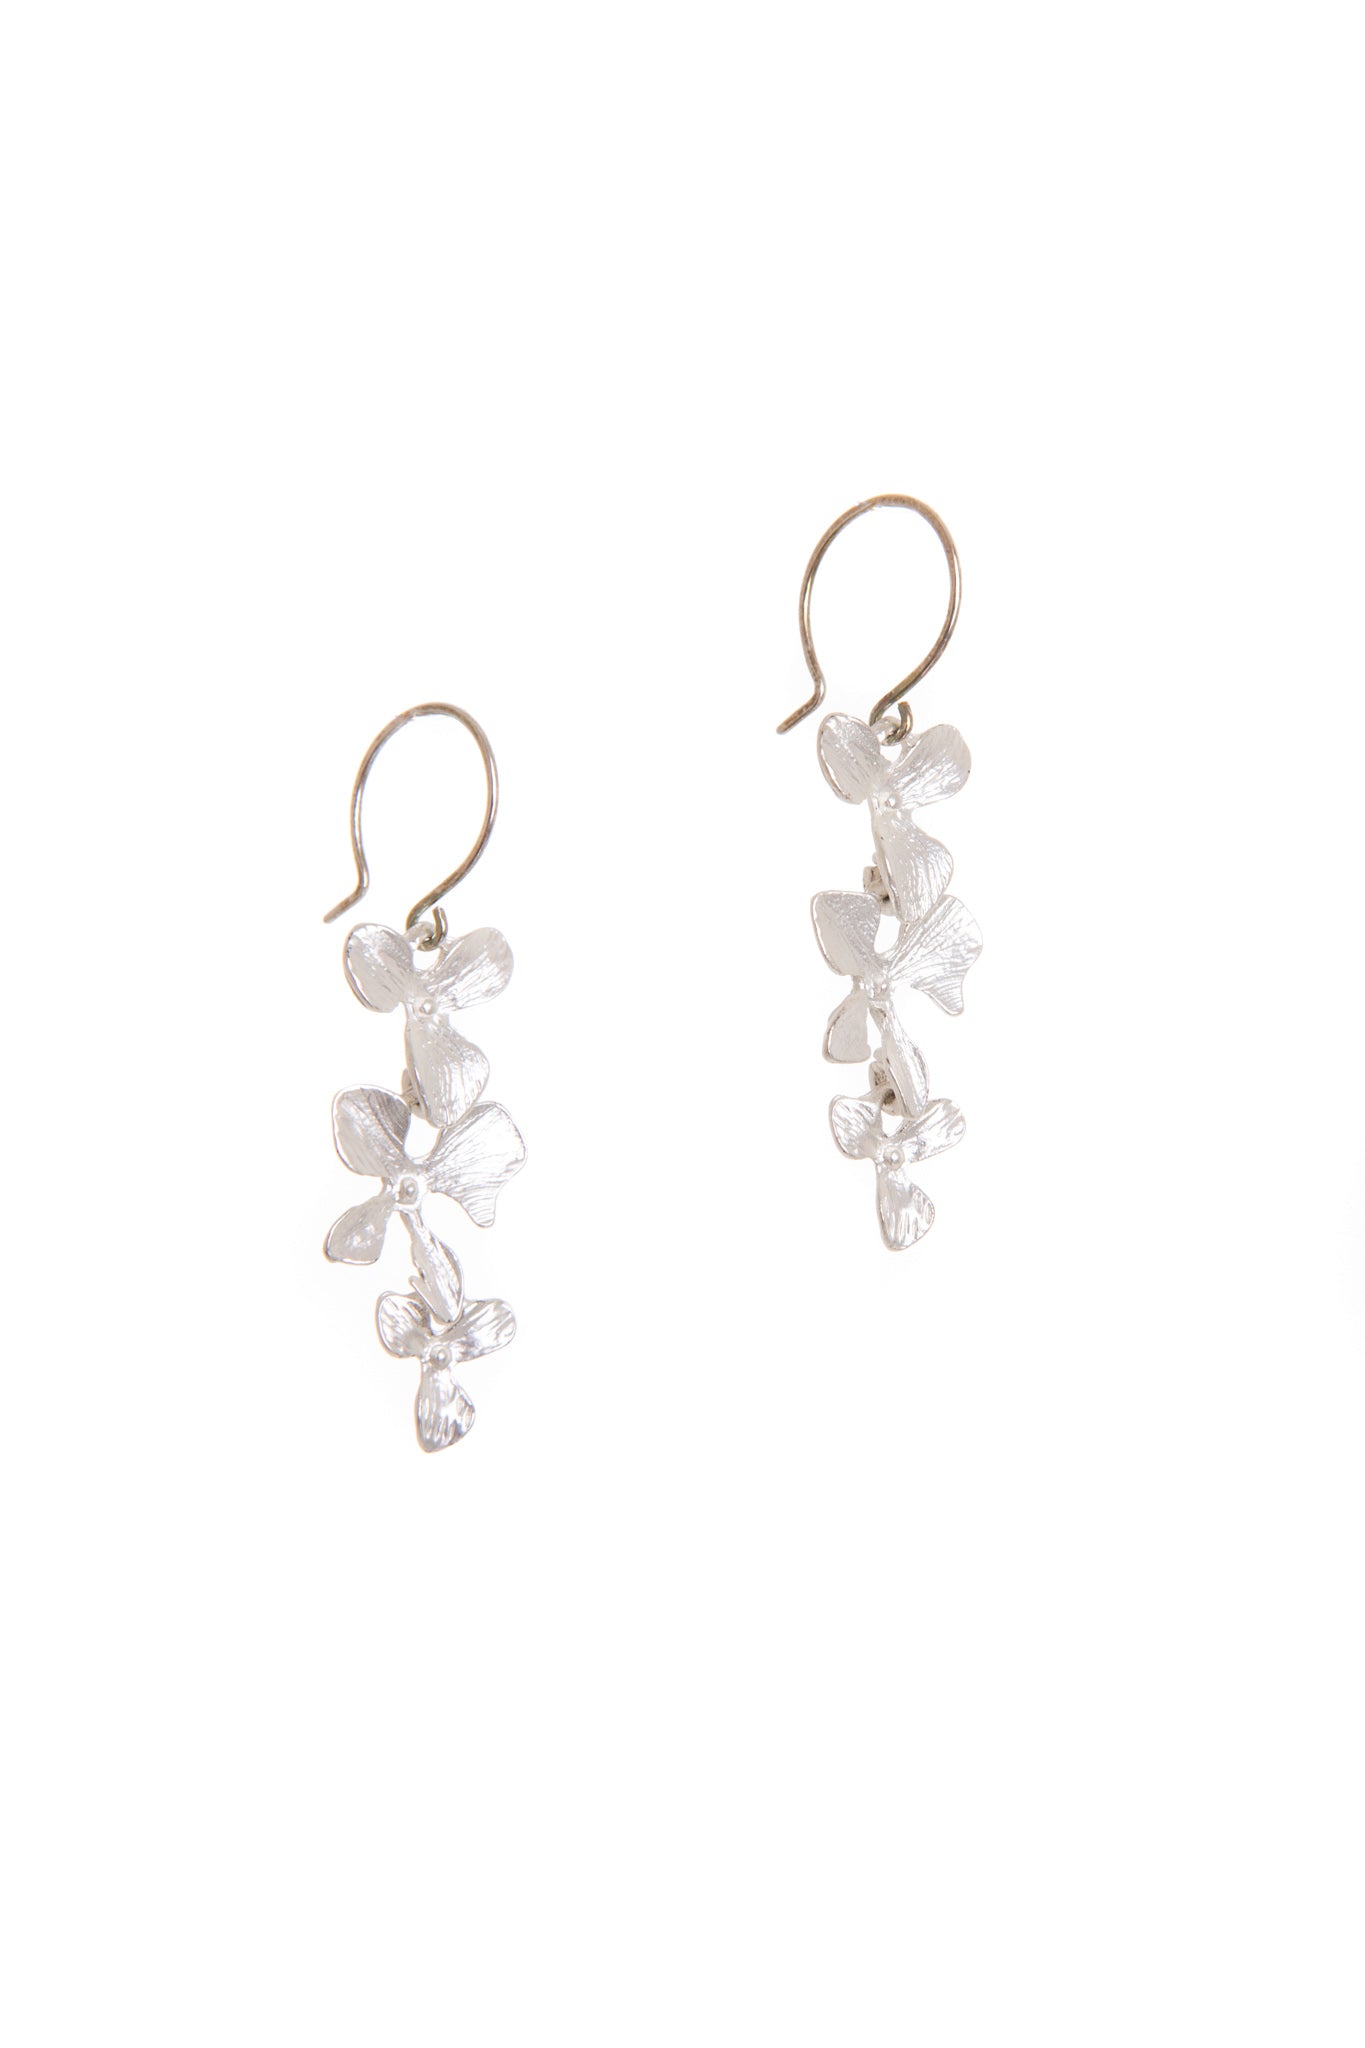 These playful Orchid earrings make the perfect accessory to add a touch of femininity to any look. Expertly crafted in silver, they will be sure to make a statement with every wear.